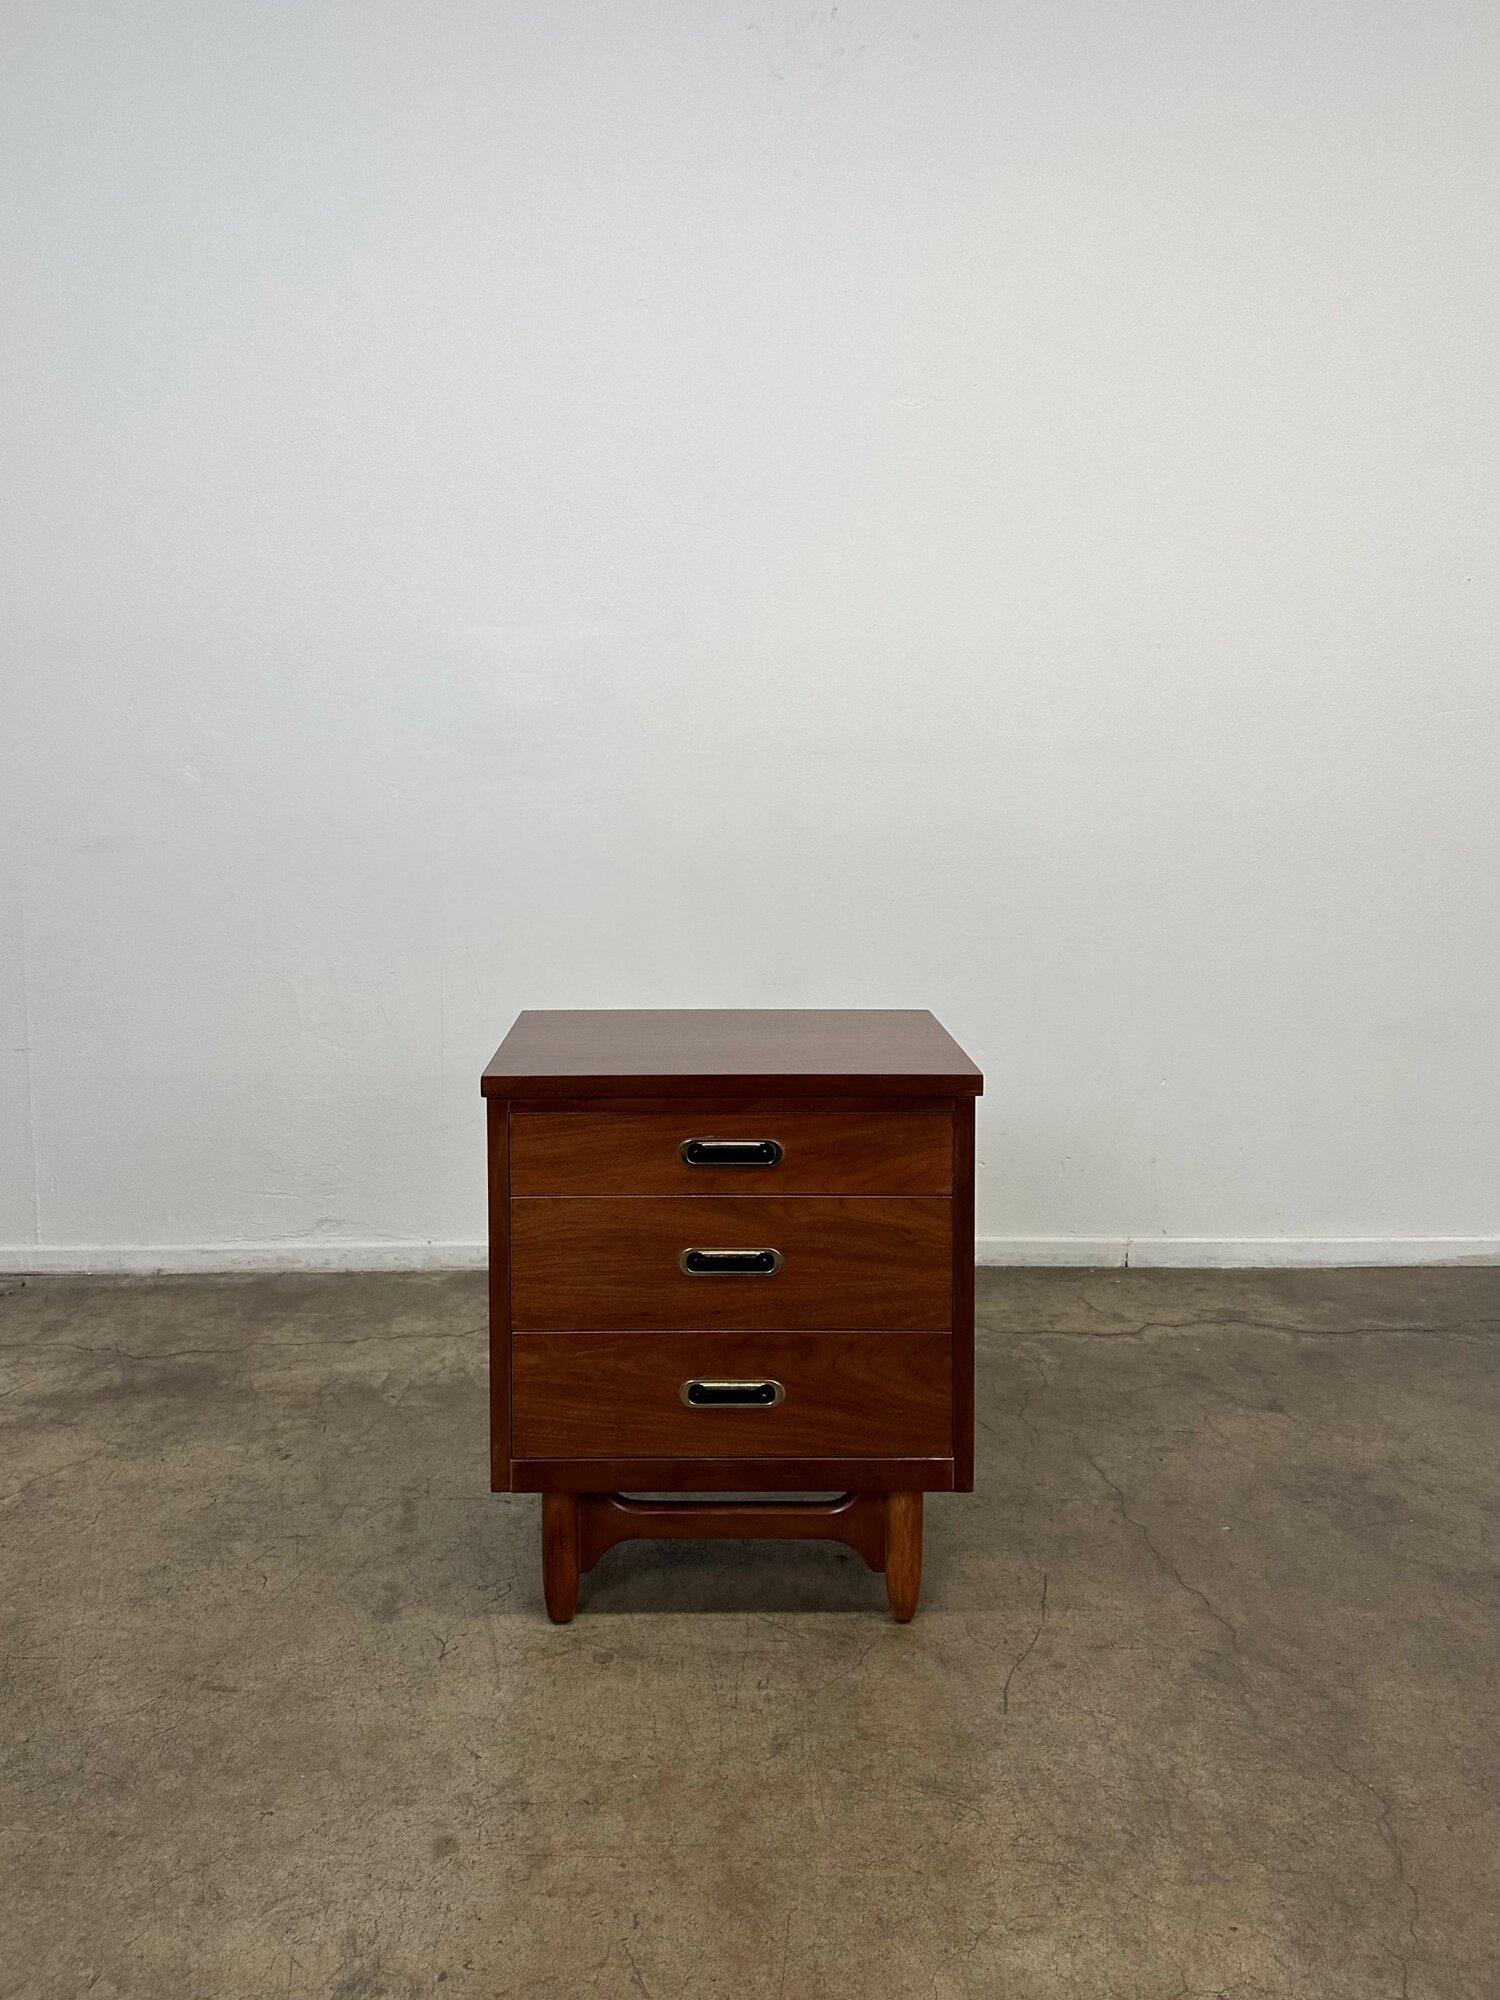 W22 D16 H26

Refinished midcentury walnut nightstand. Item offer three drawers of storage and is a bit on the taller narrow side, harder to find dimensions for nightstands. Price is for a single nightstand.